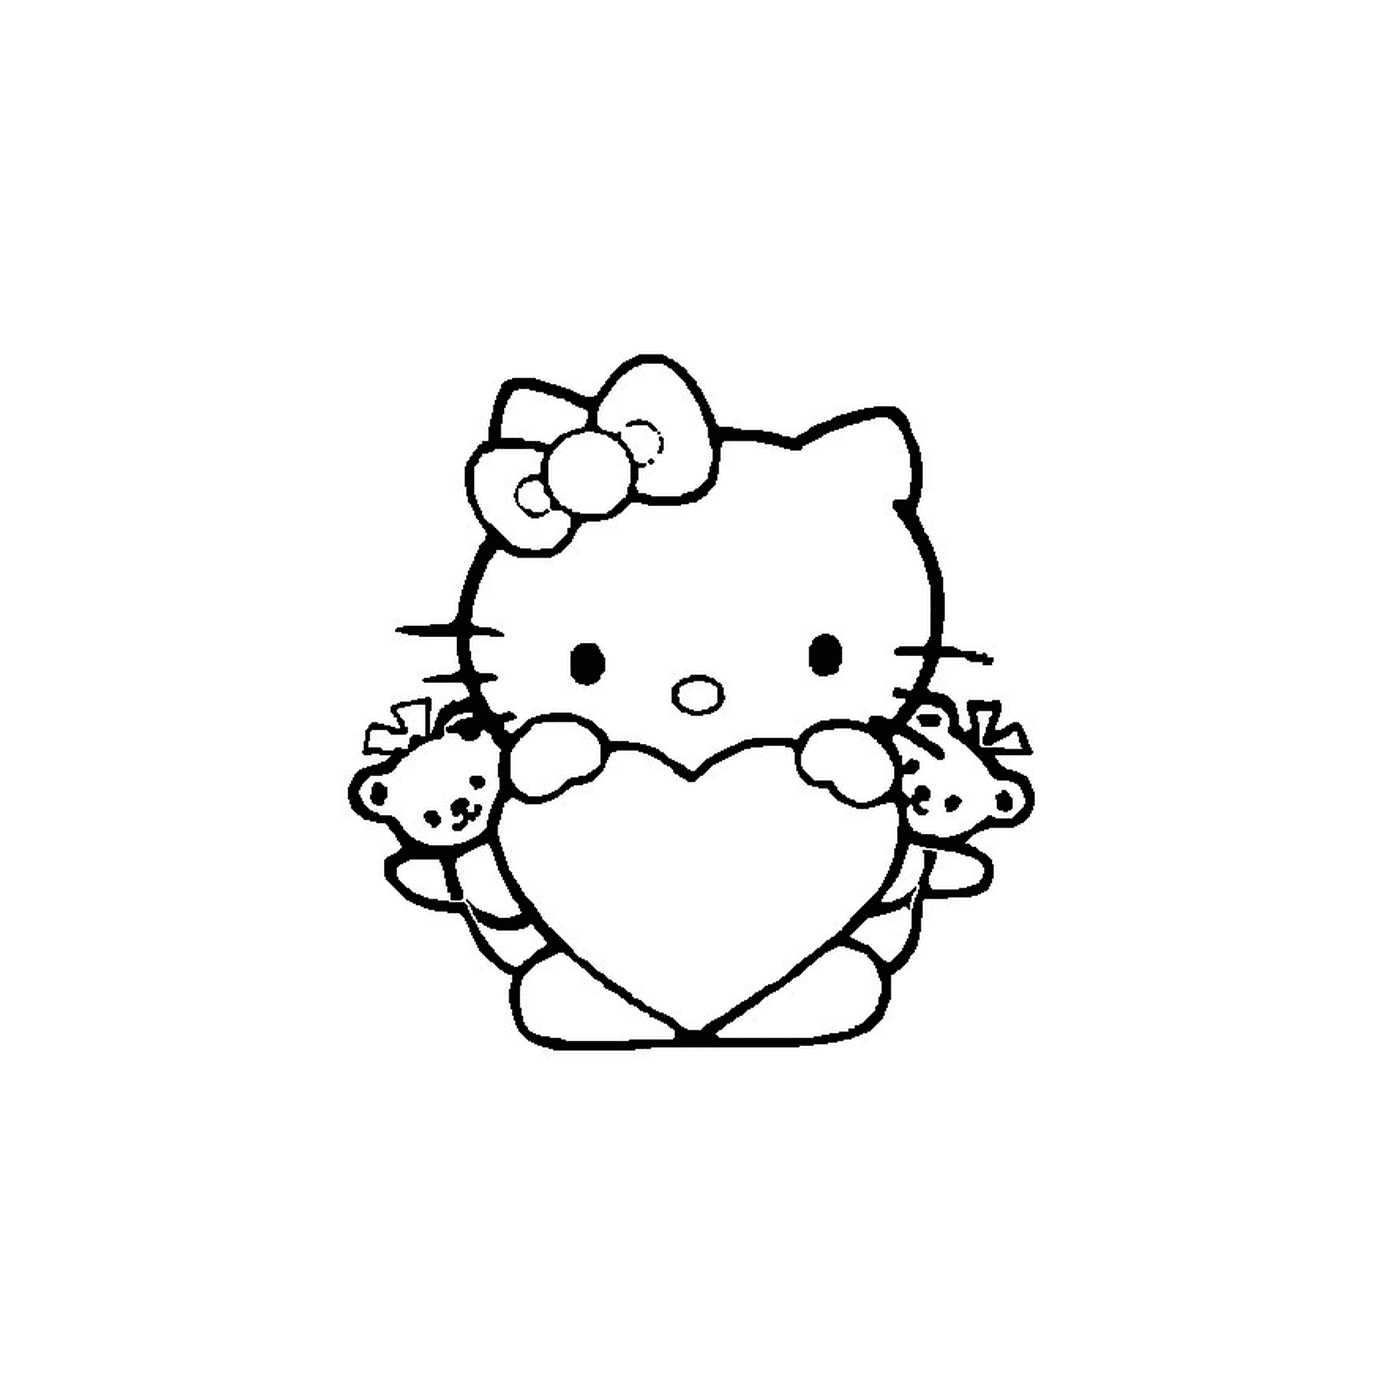  Hello Kitty holding a teddy bear in front of a heart 